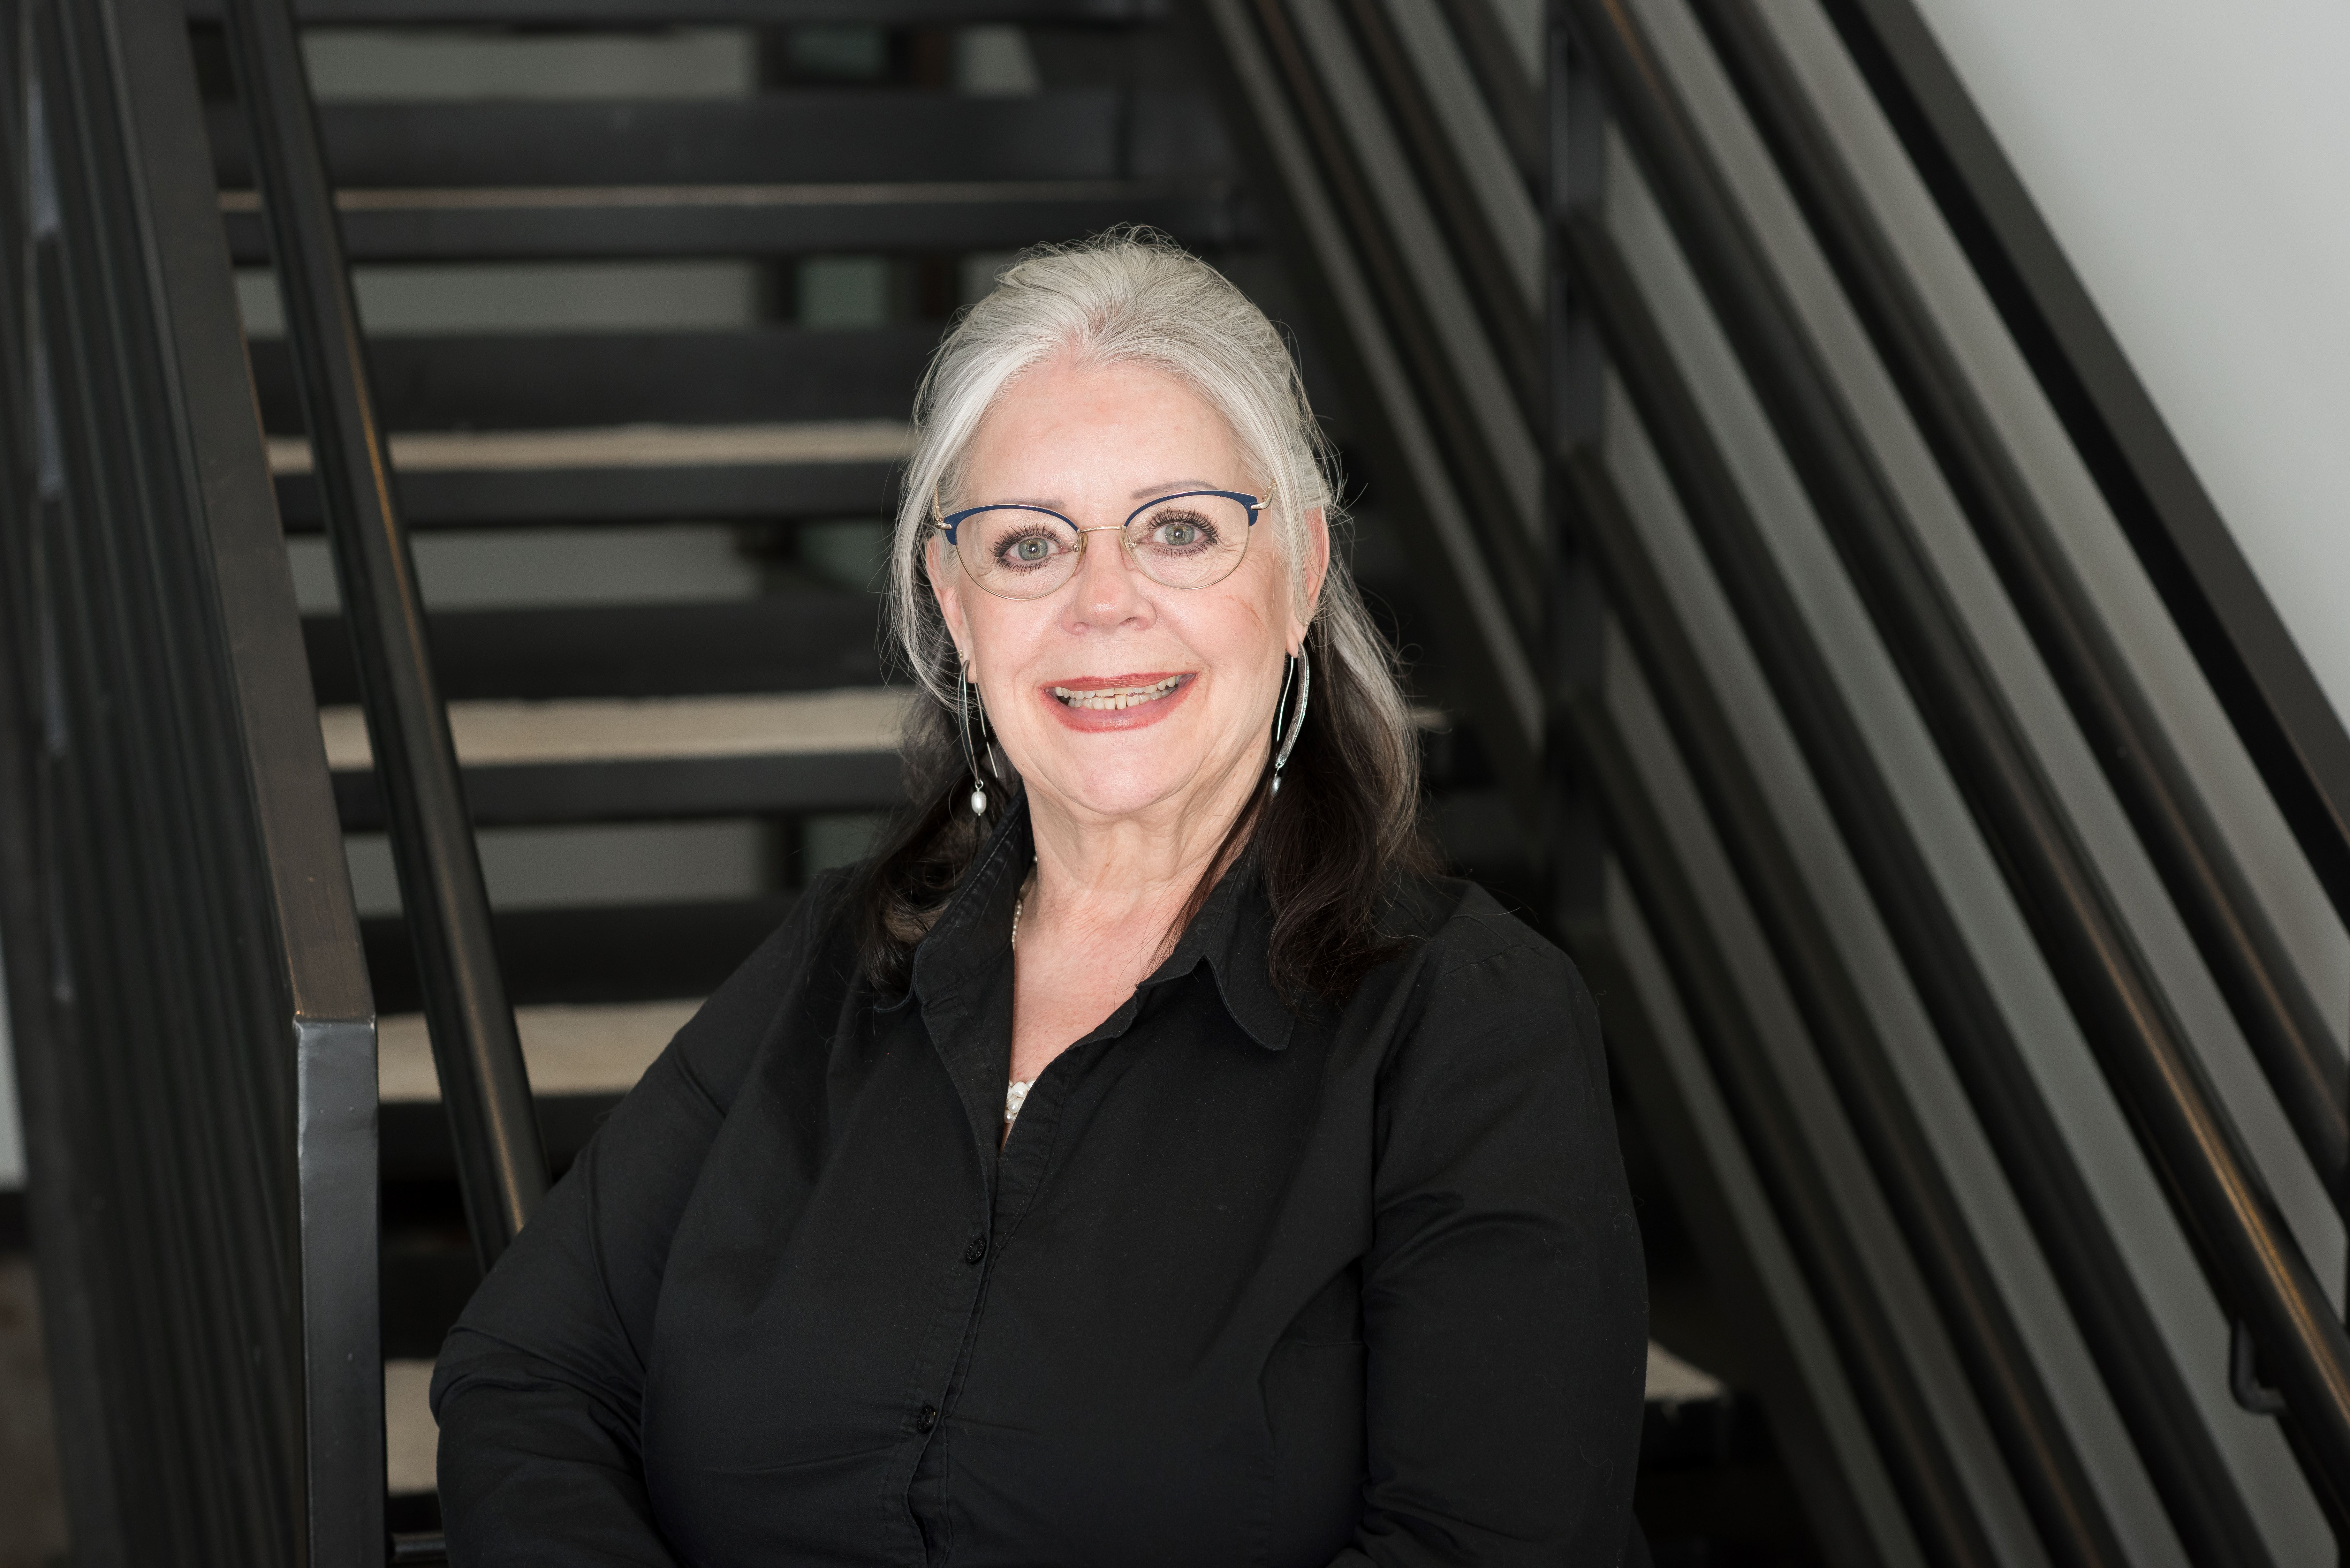 woman with glasses standing by stairs wearing a black shirt